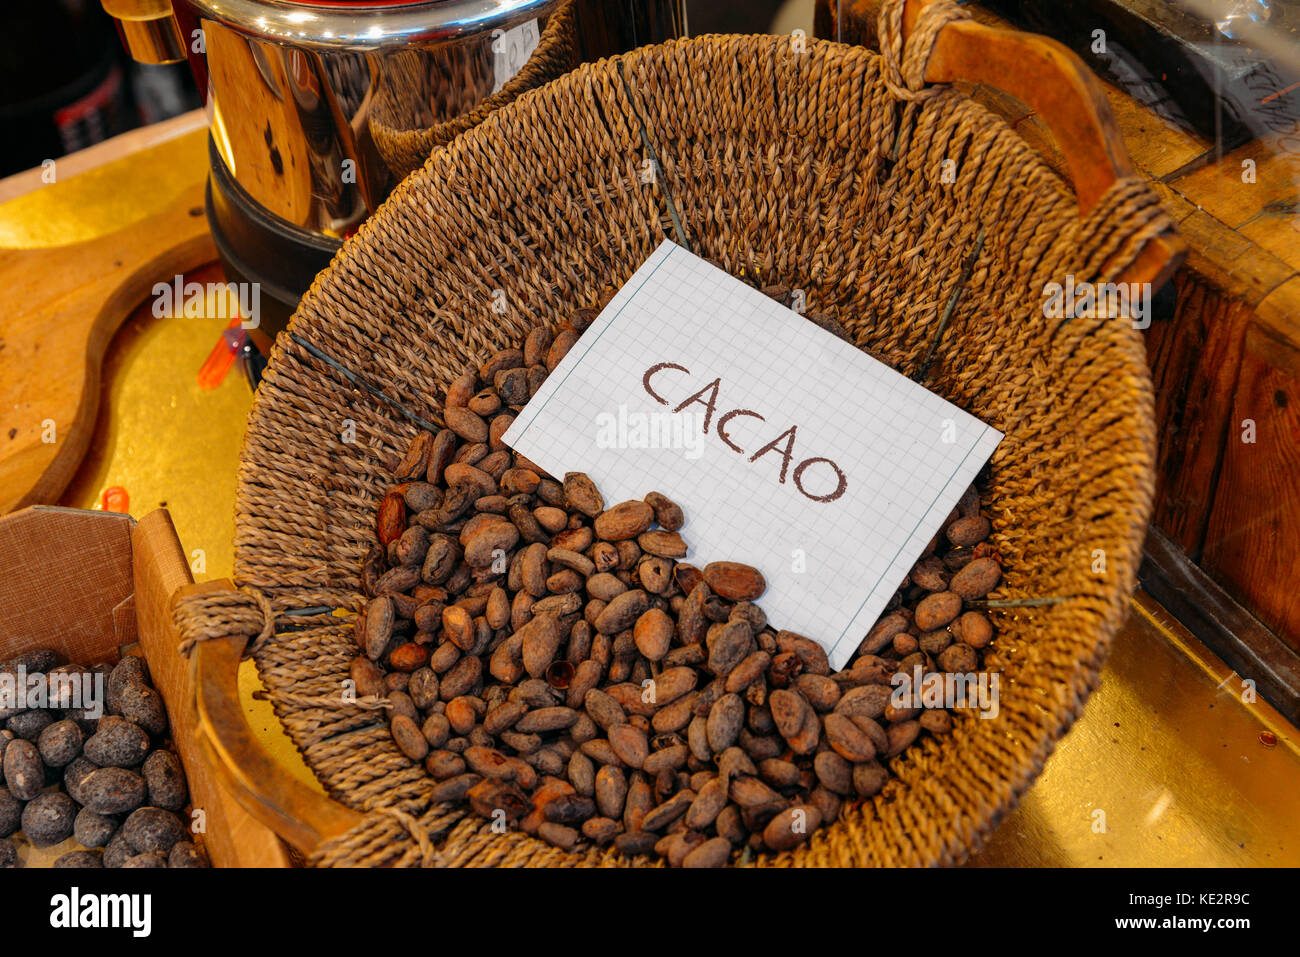 Cacao beans, the raw product of chocolate on display Stock Photo